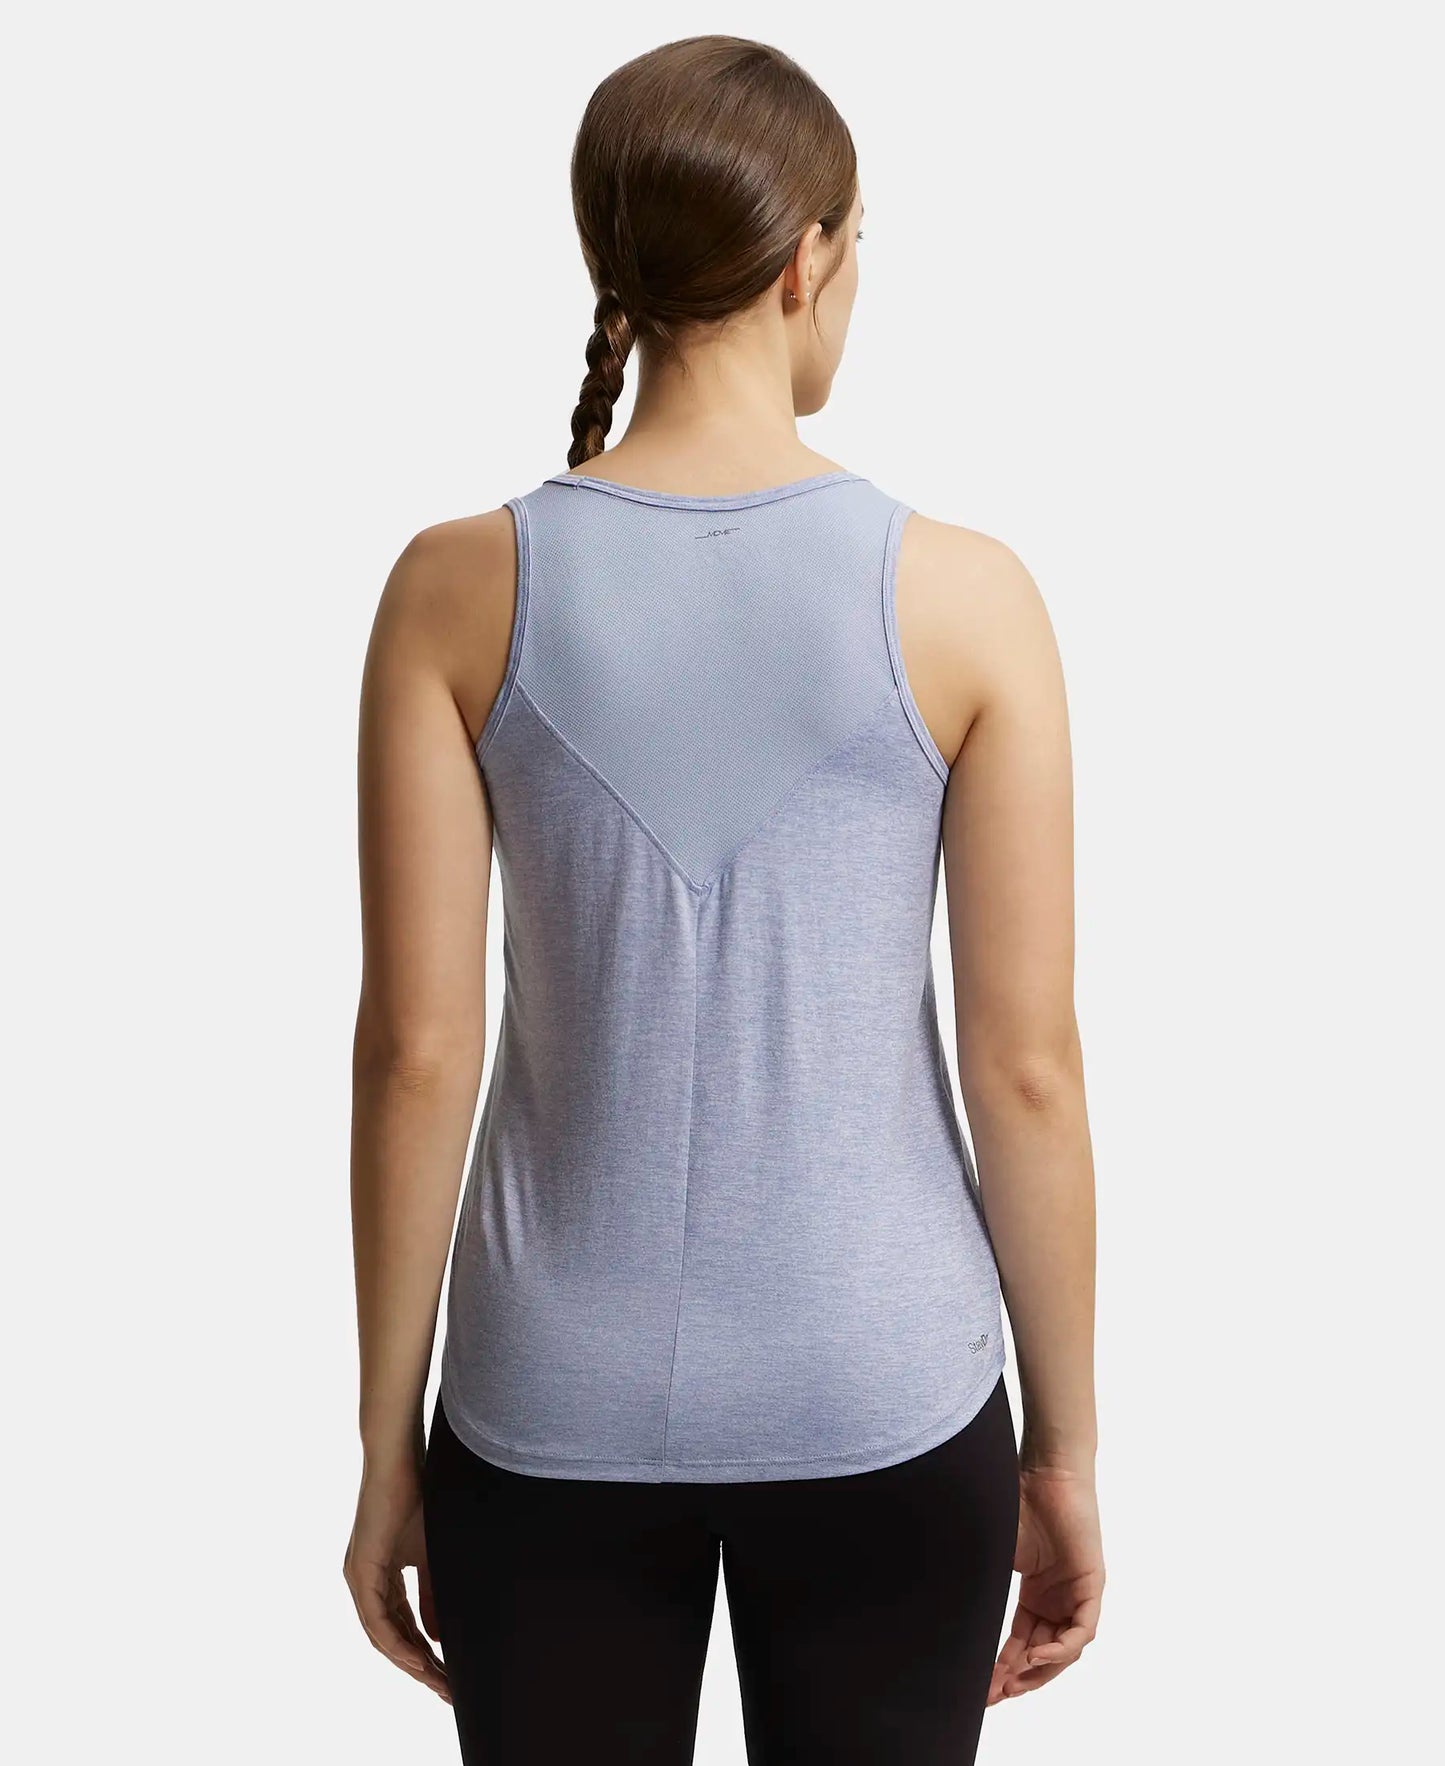 Microfiber Fabric Graphic Printed Tank Top With Breathable Mesh - Even Tide-3